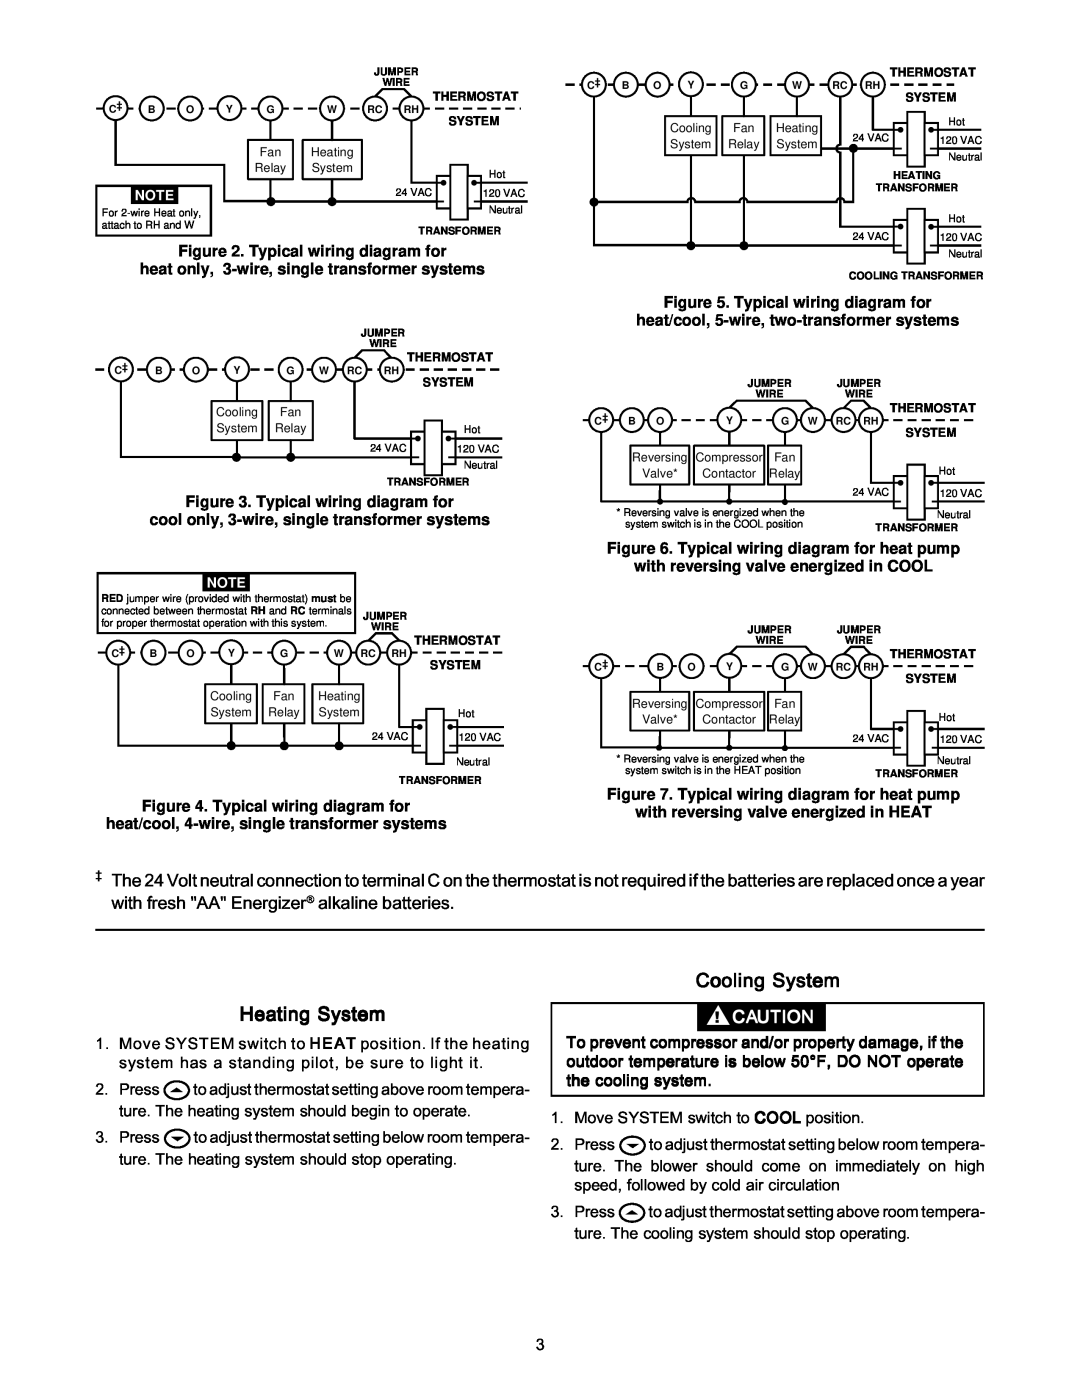 White Rodgers 1F87-361 Heating System, Cooling System, Typical wiring diagram for heat pump, Thermostat, Relay 